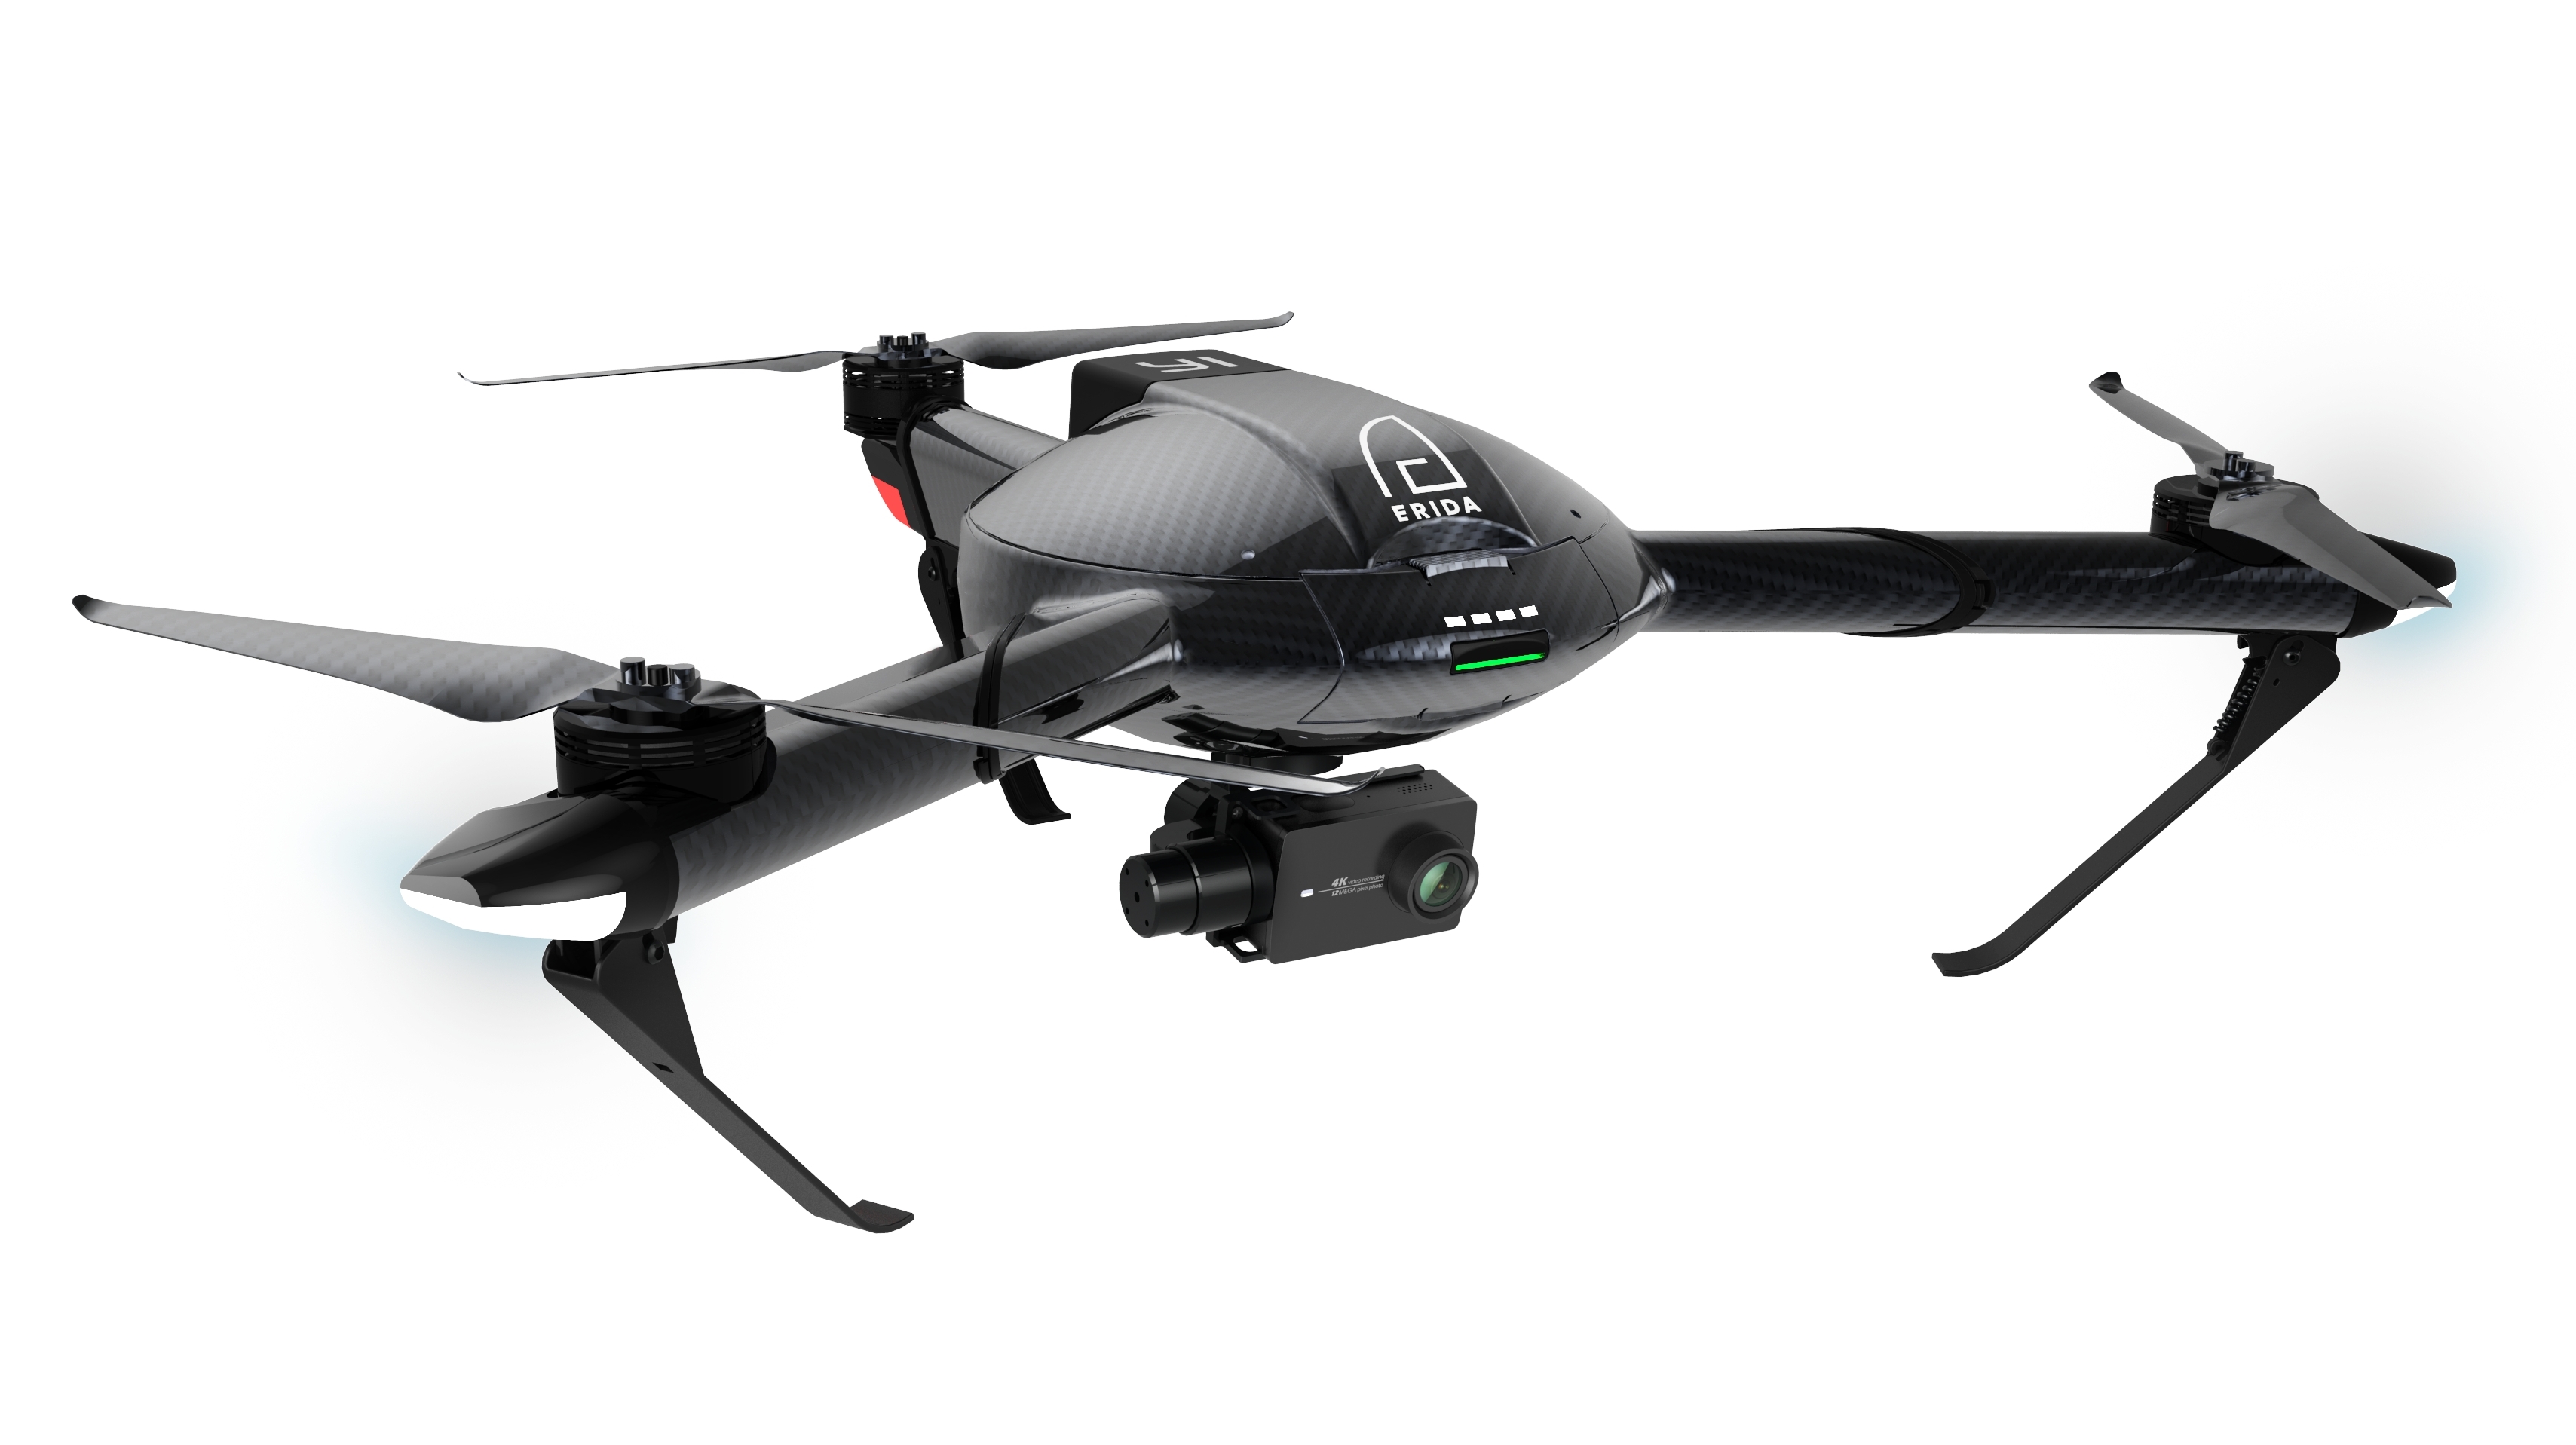 YI to Debut World's Fastest Tri-Copter at InterDrone | Wire